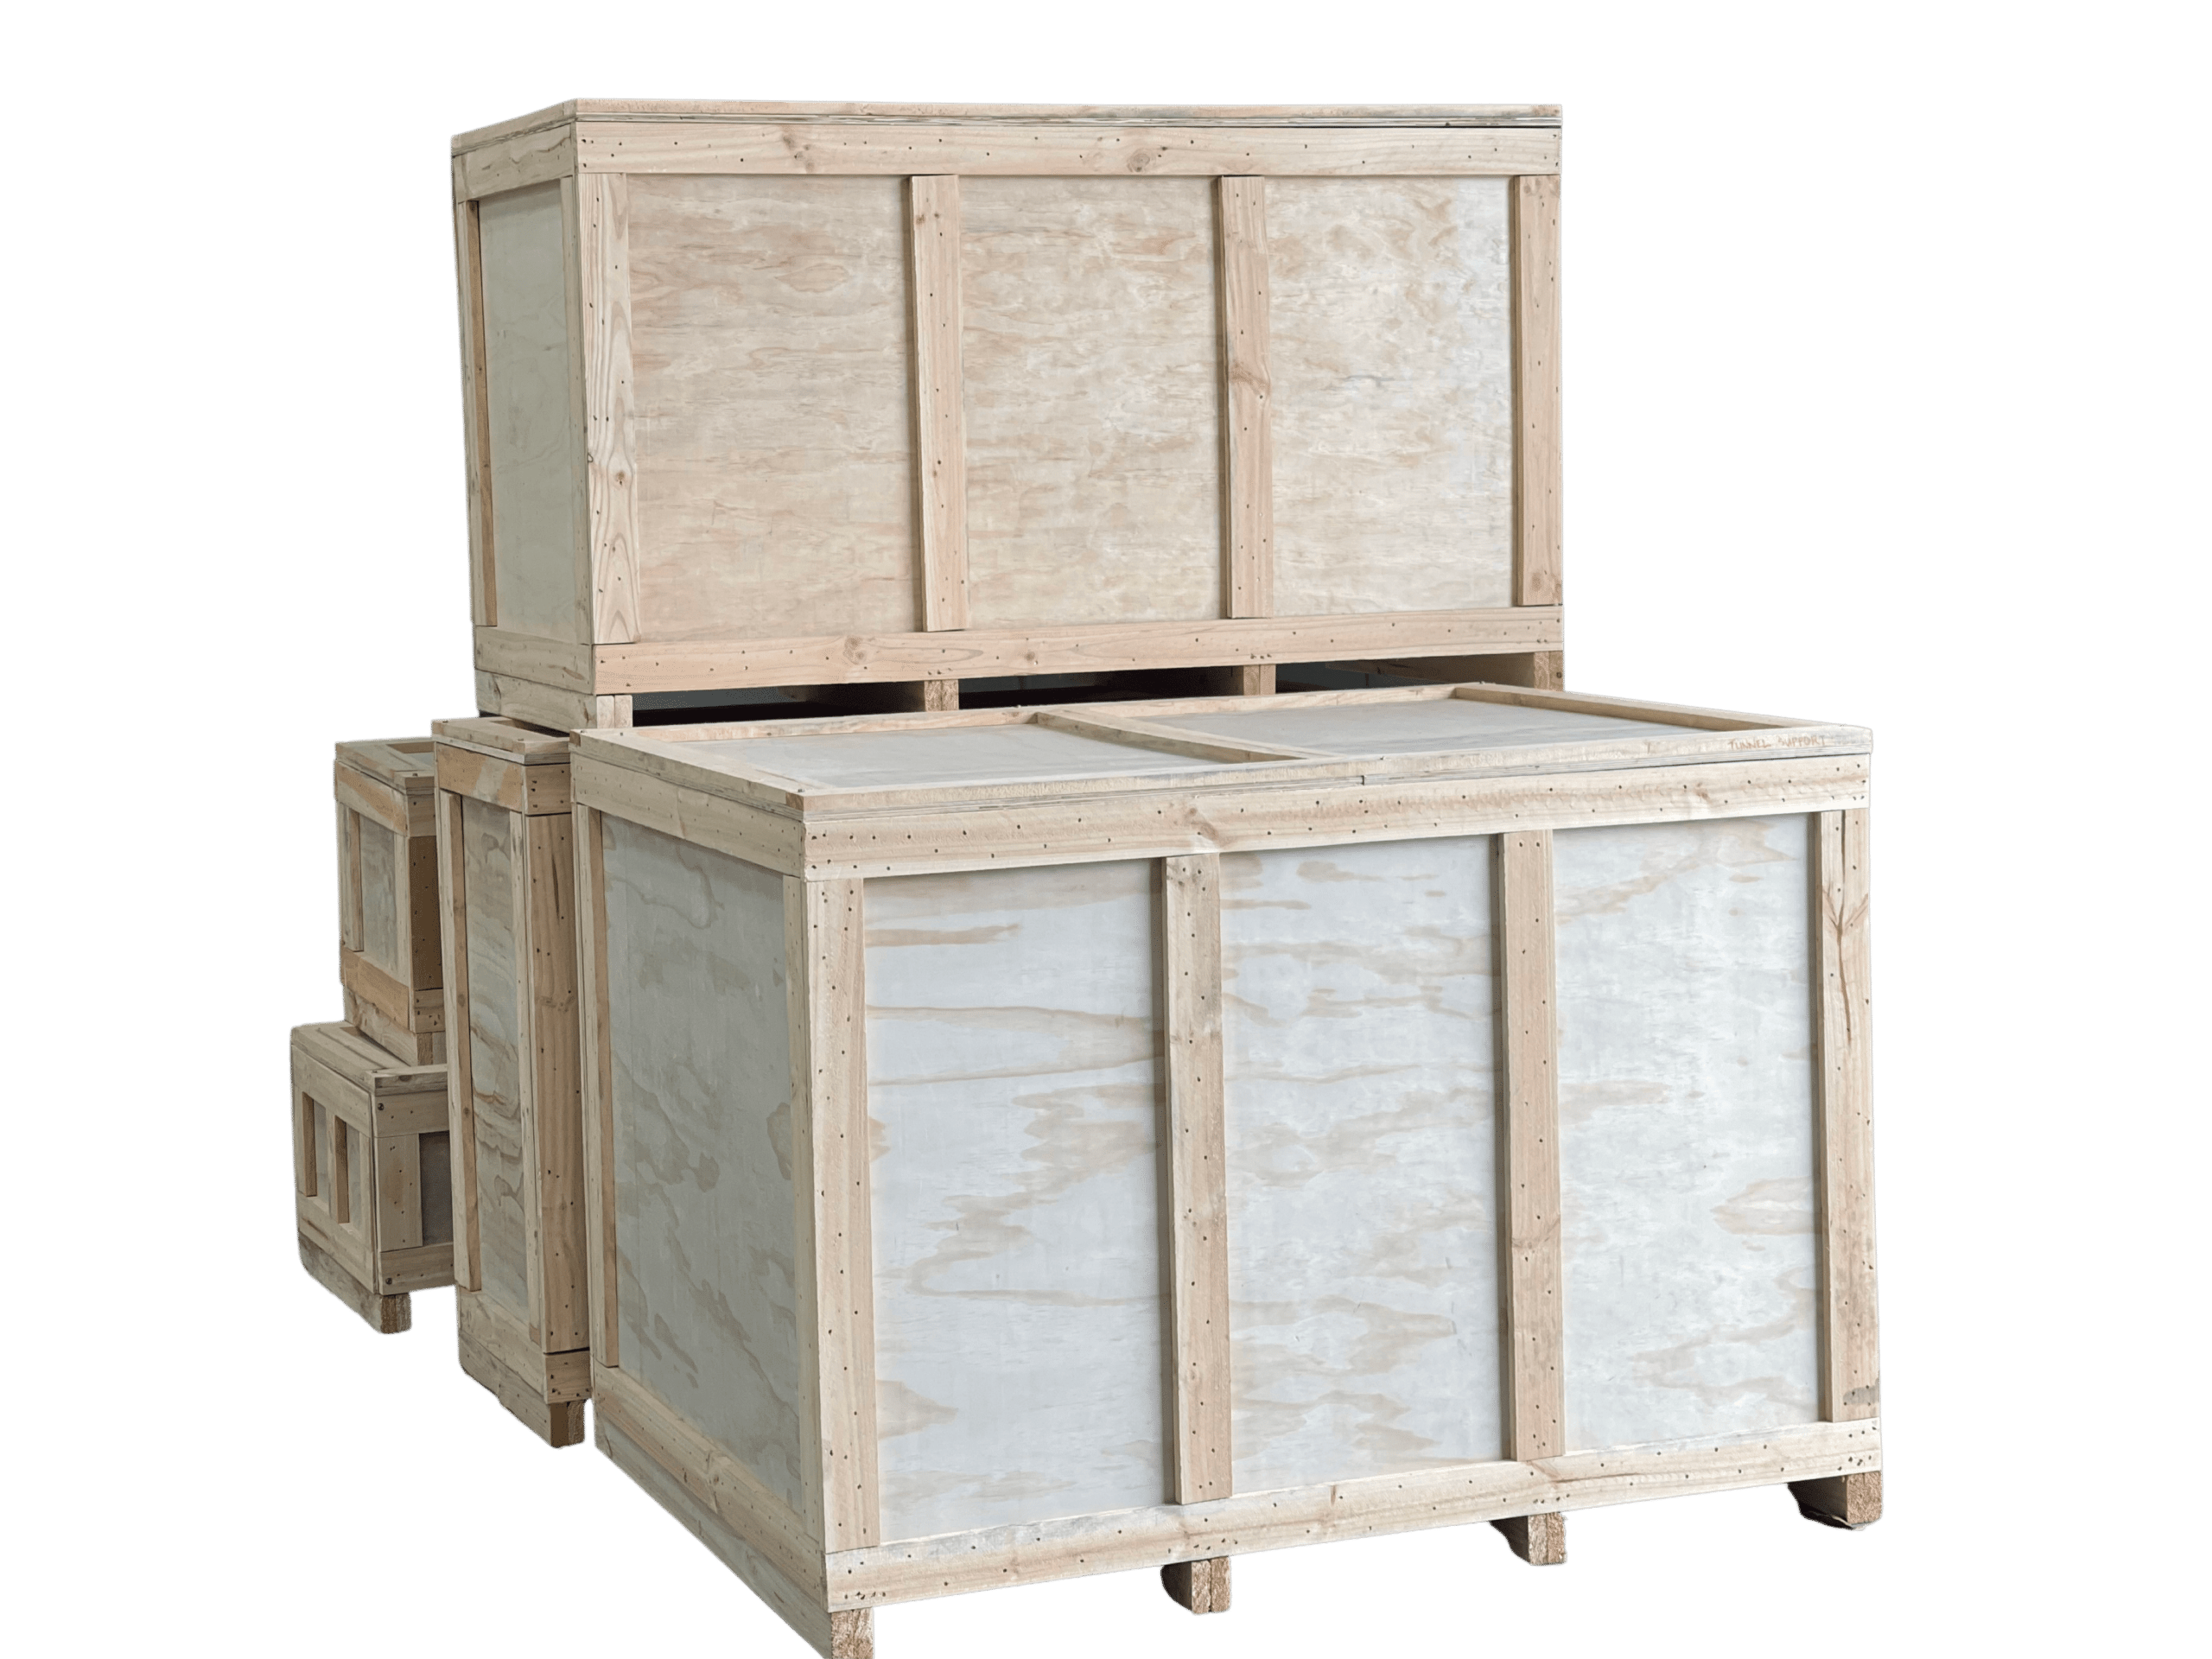 plywood boxes